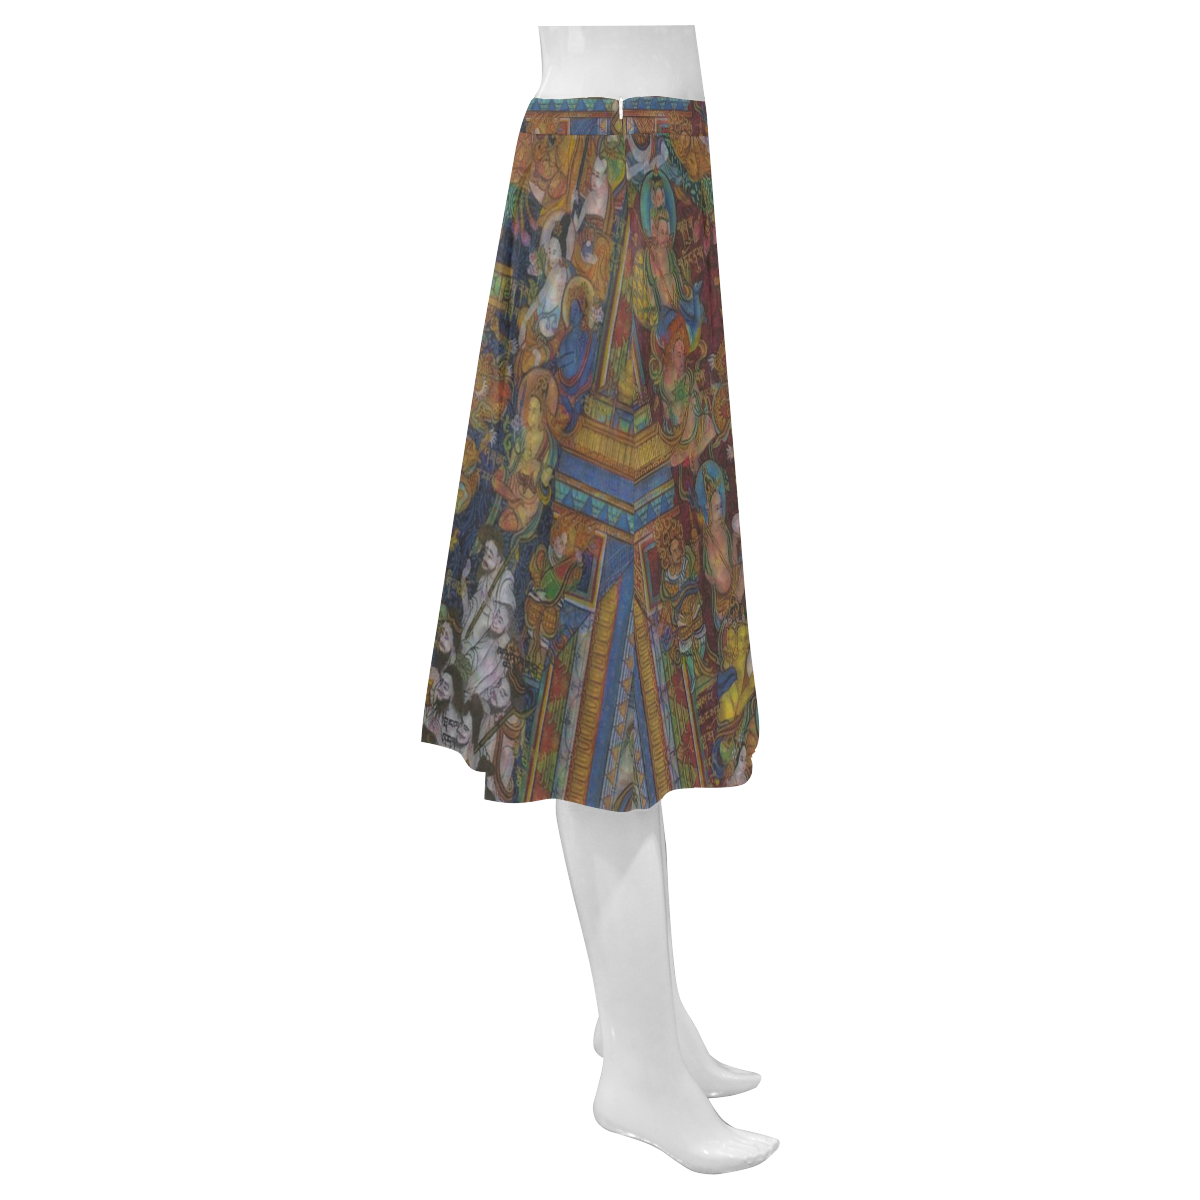 Awesome Thanka With The Holy Medicine Buddha Mnemosyne Women's Crepe Skirt (Model D16)